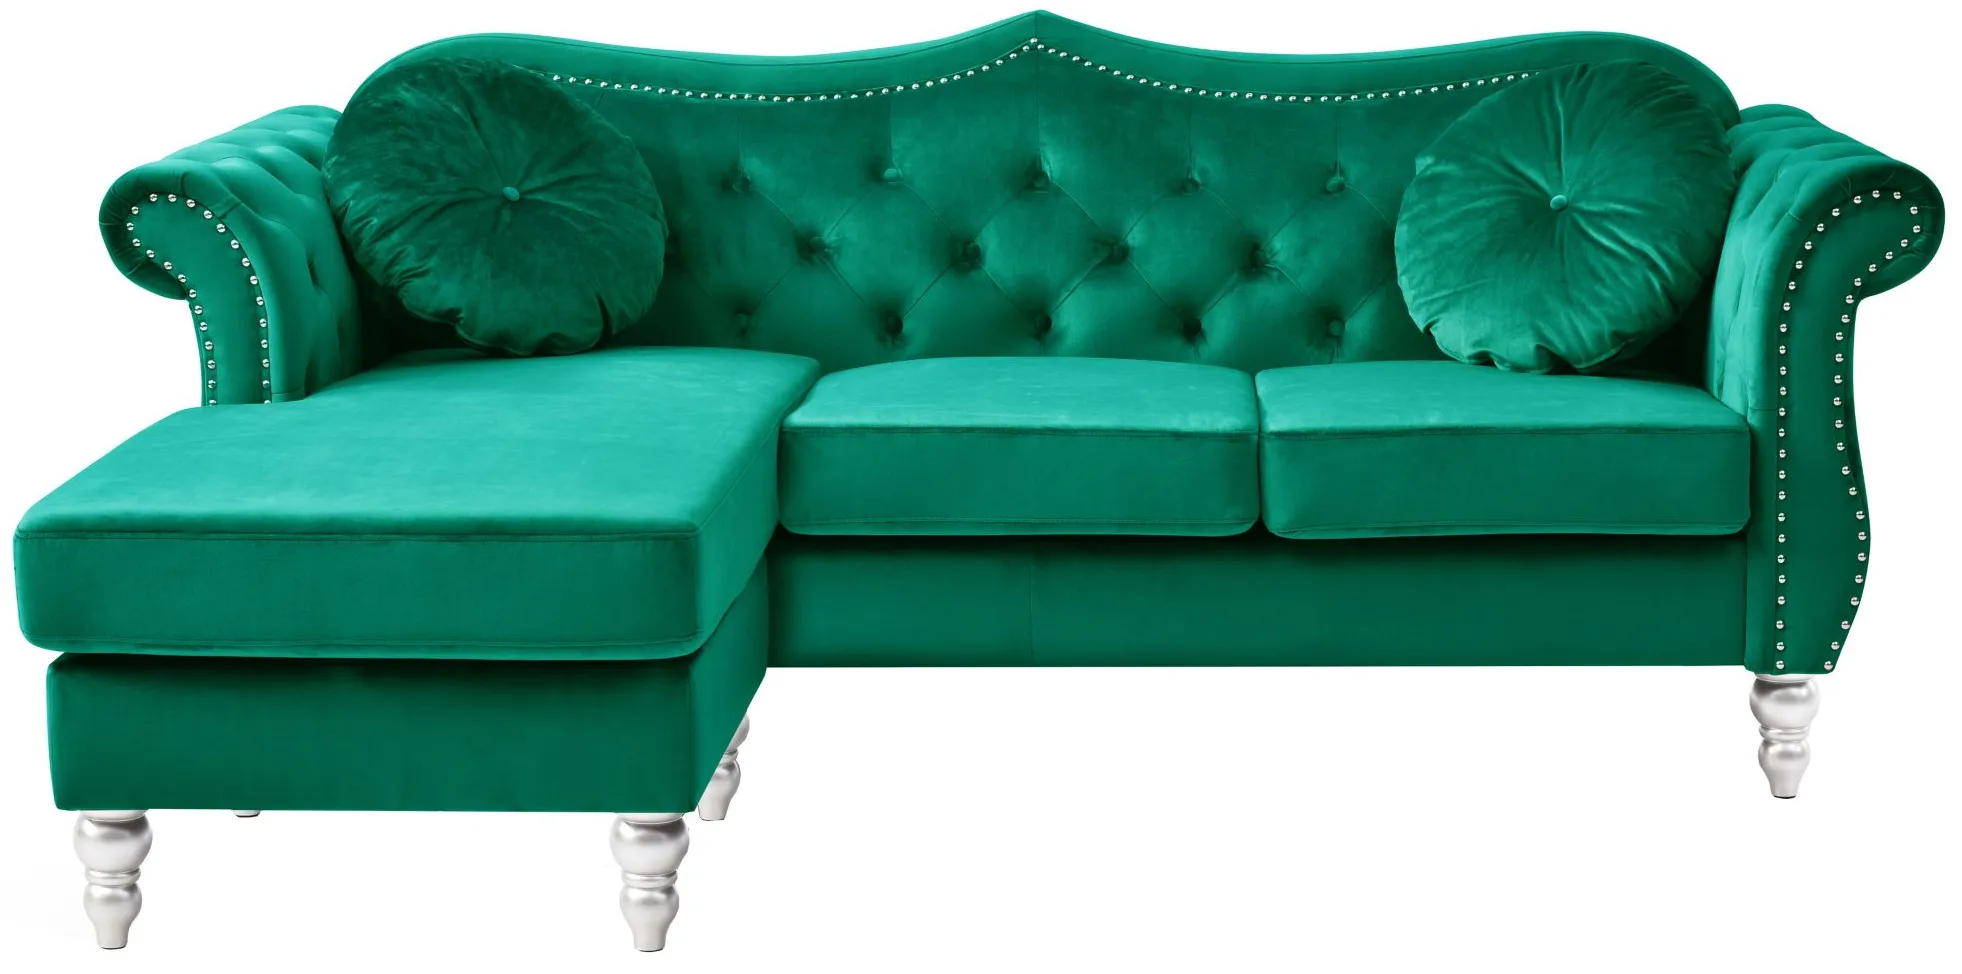 Hollywood Sectional Sofa in Green by Glory Furniture